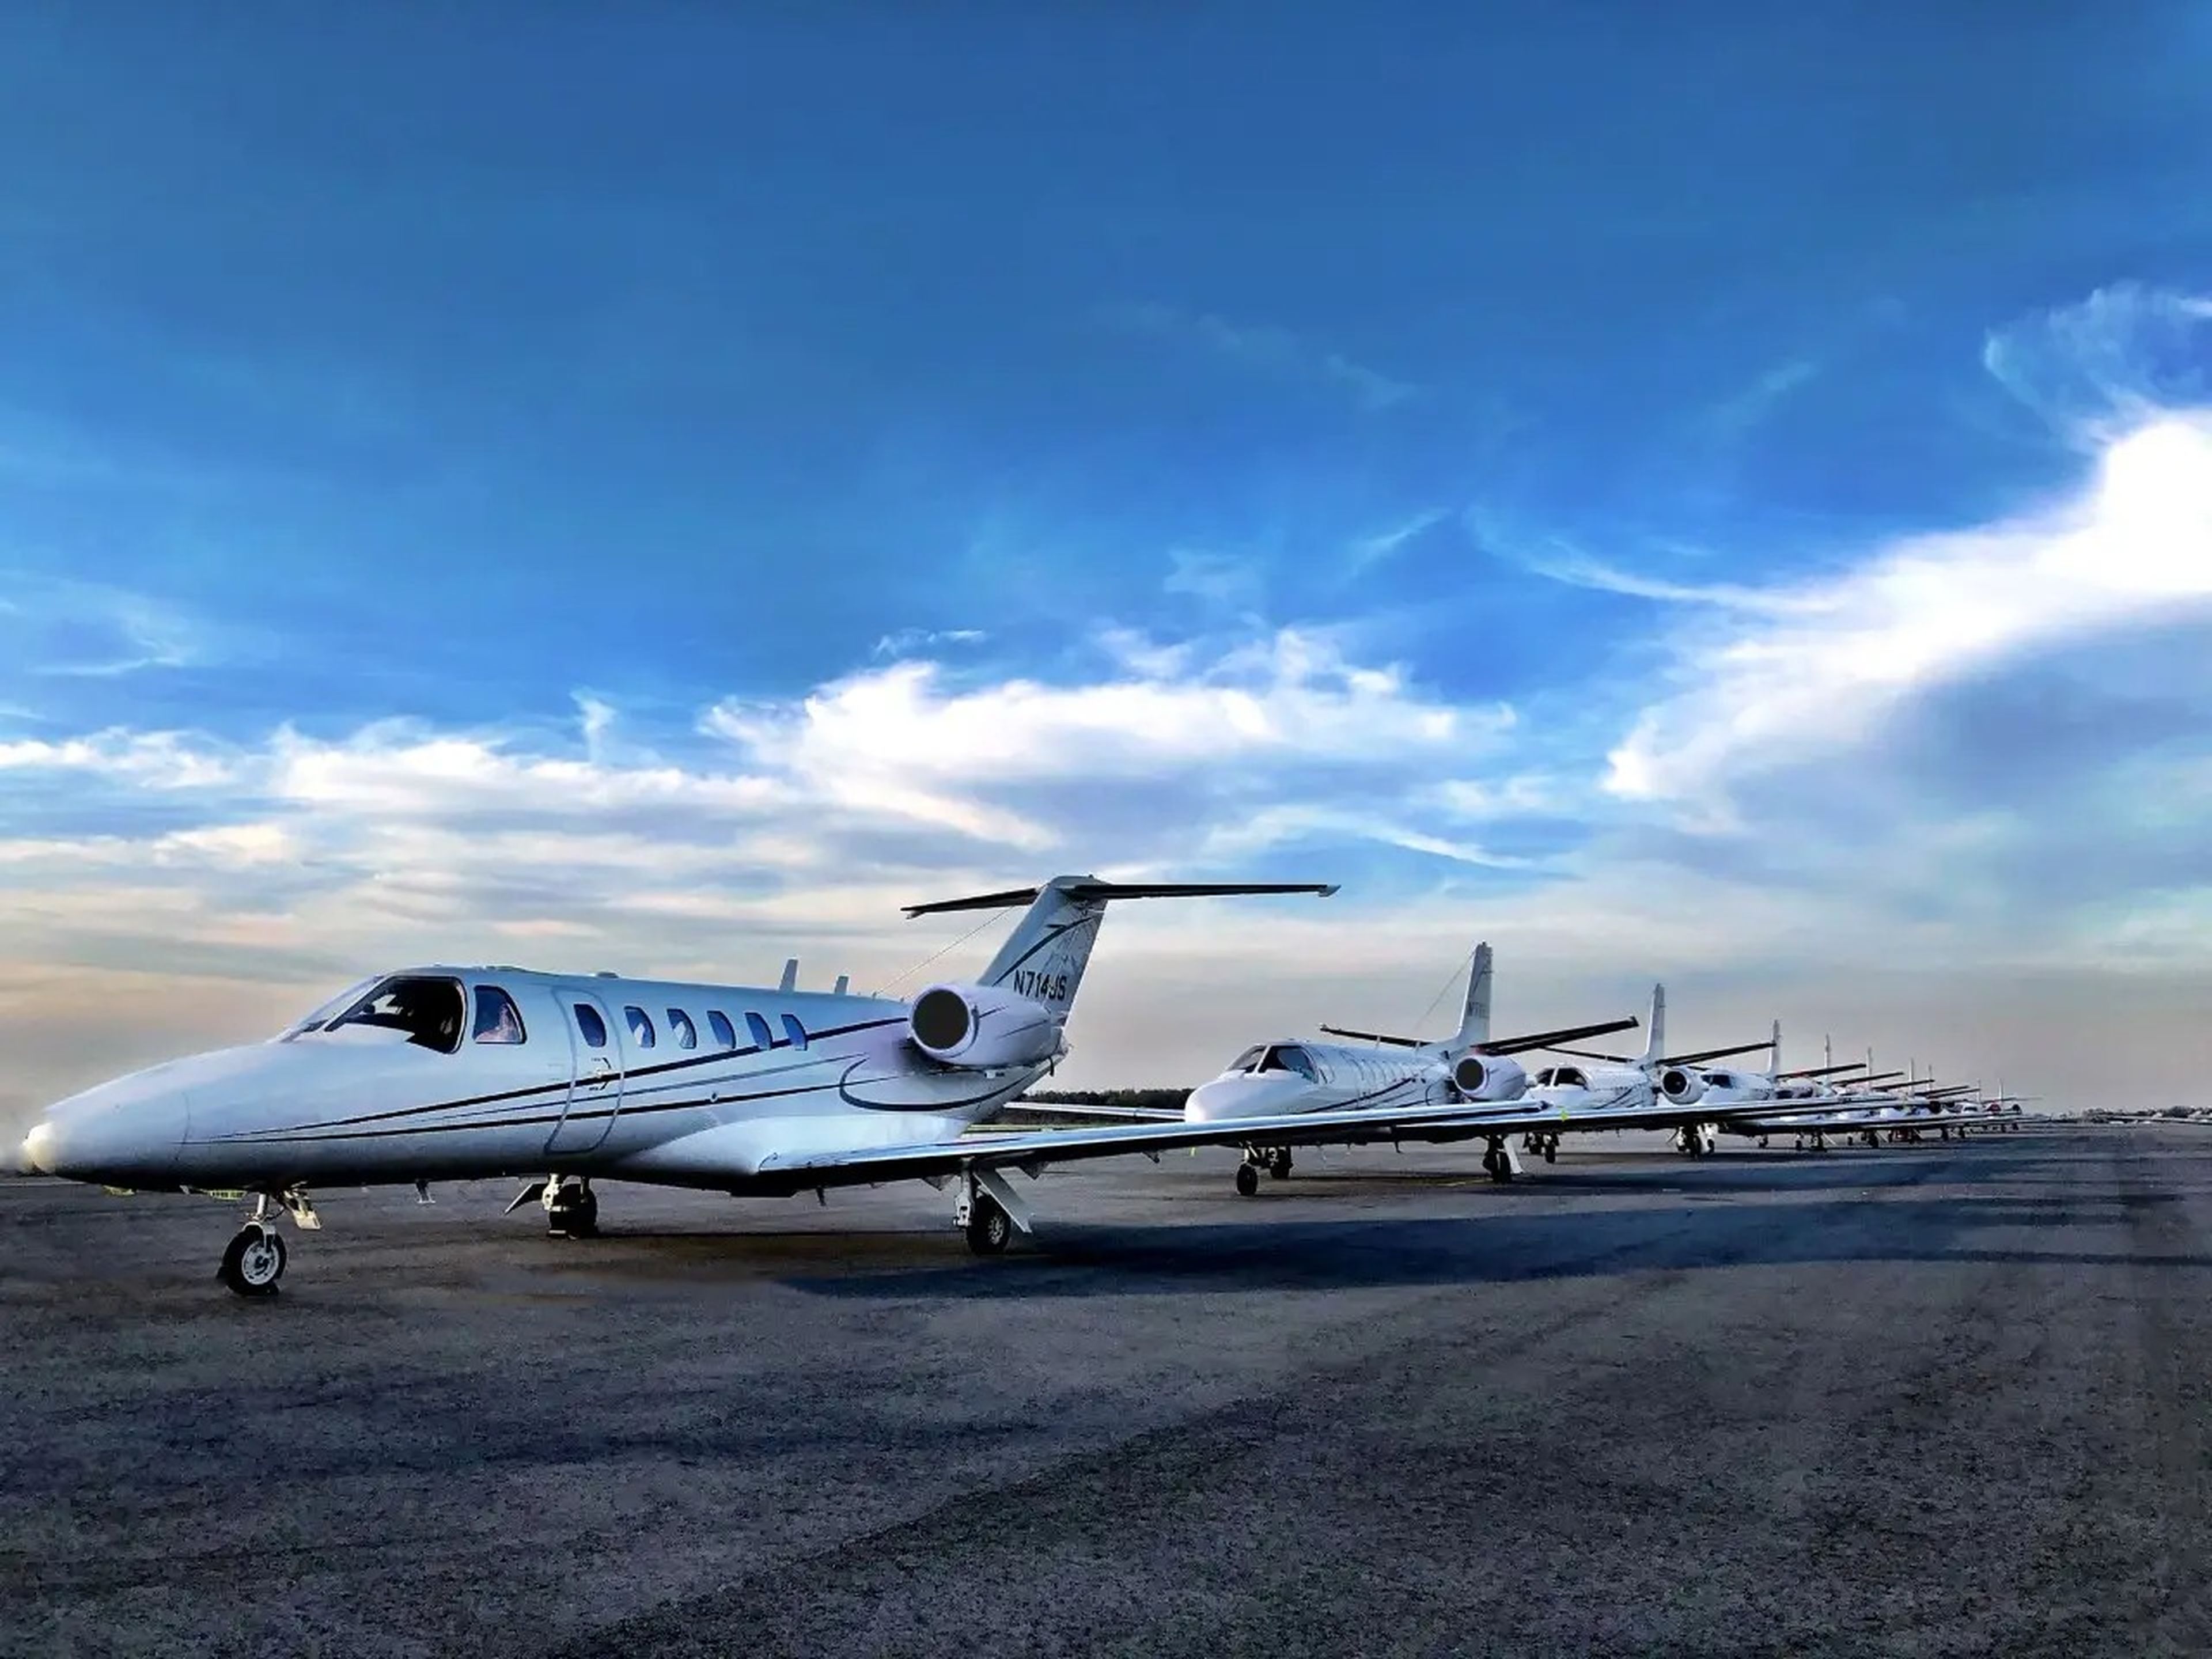 flyExclusive has hired 100 pilots this year, as the jet charter company expands.